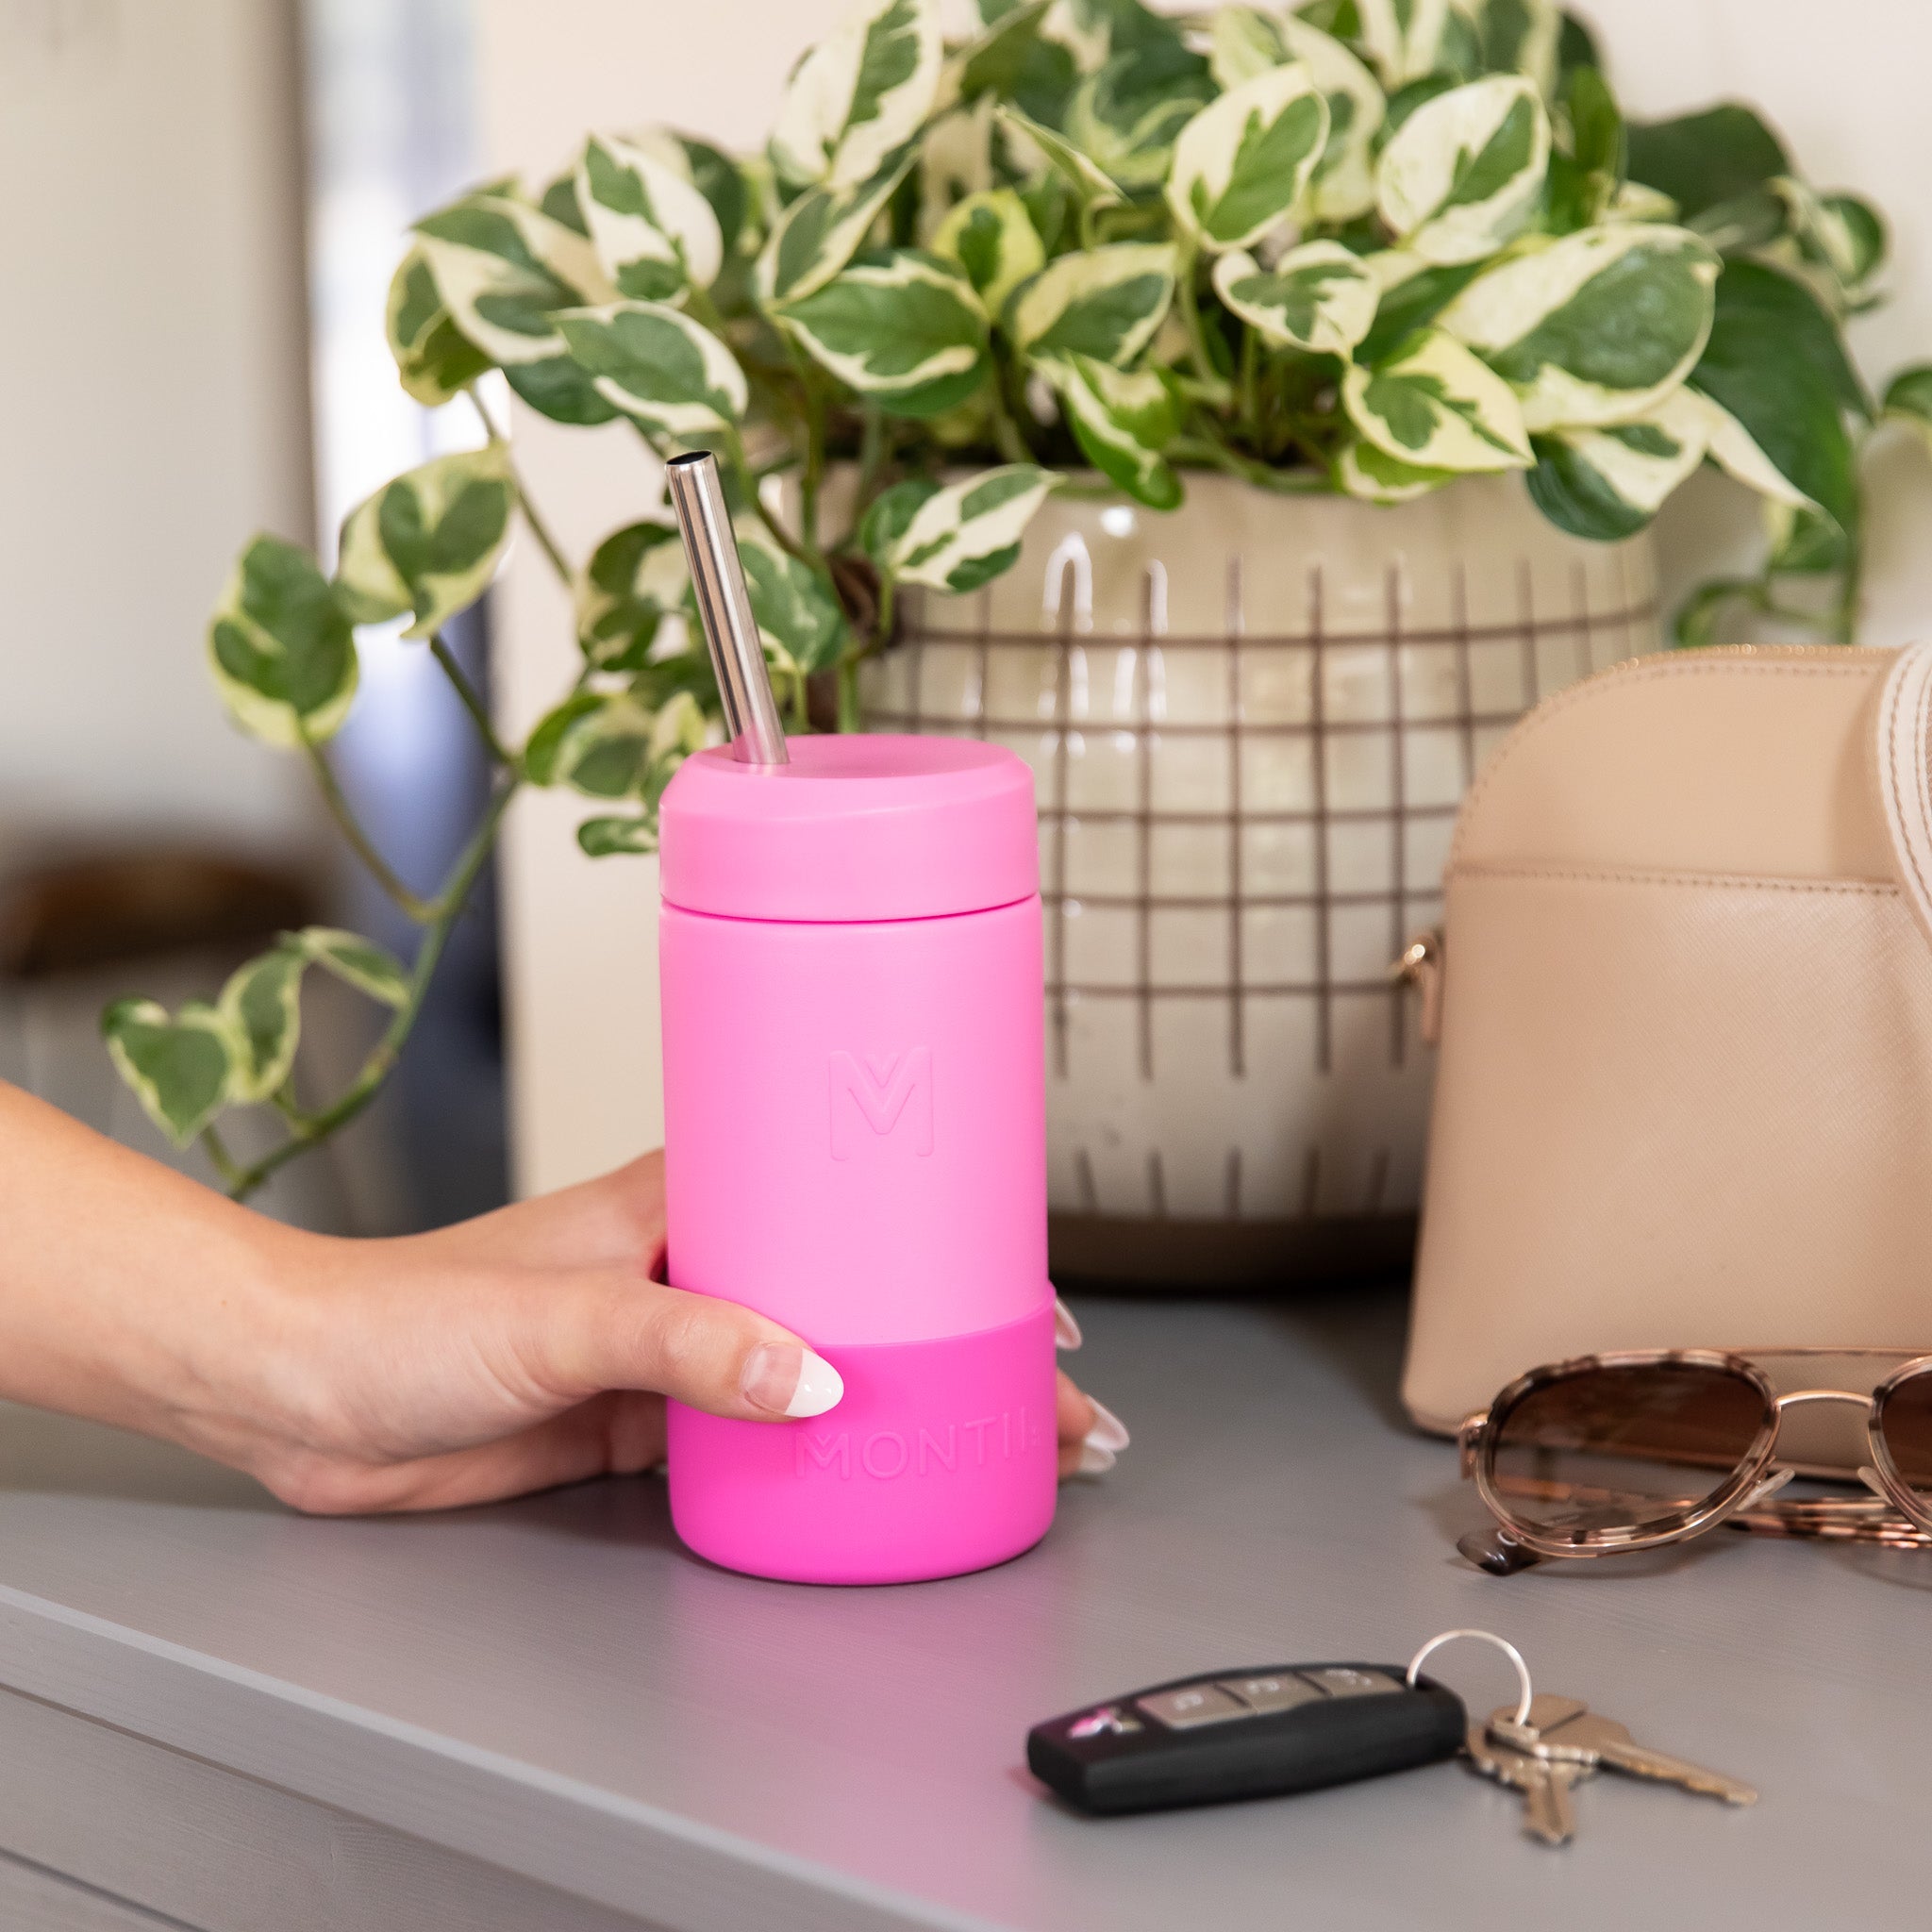 350ml pink insulated drink bottle